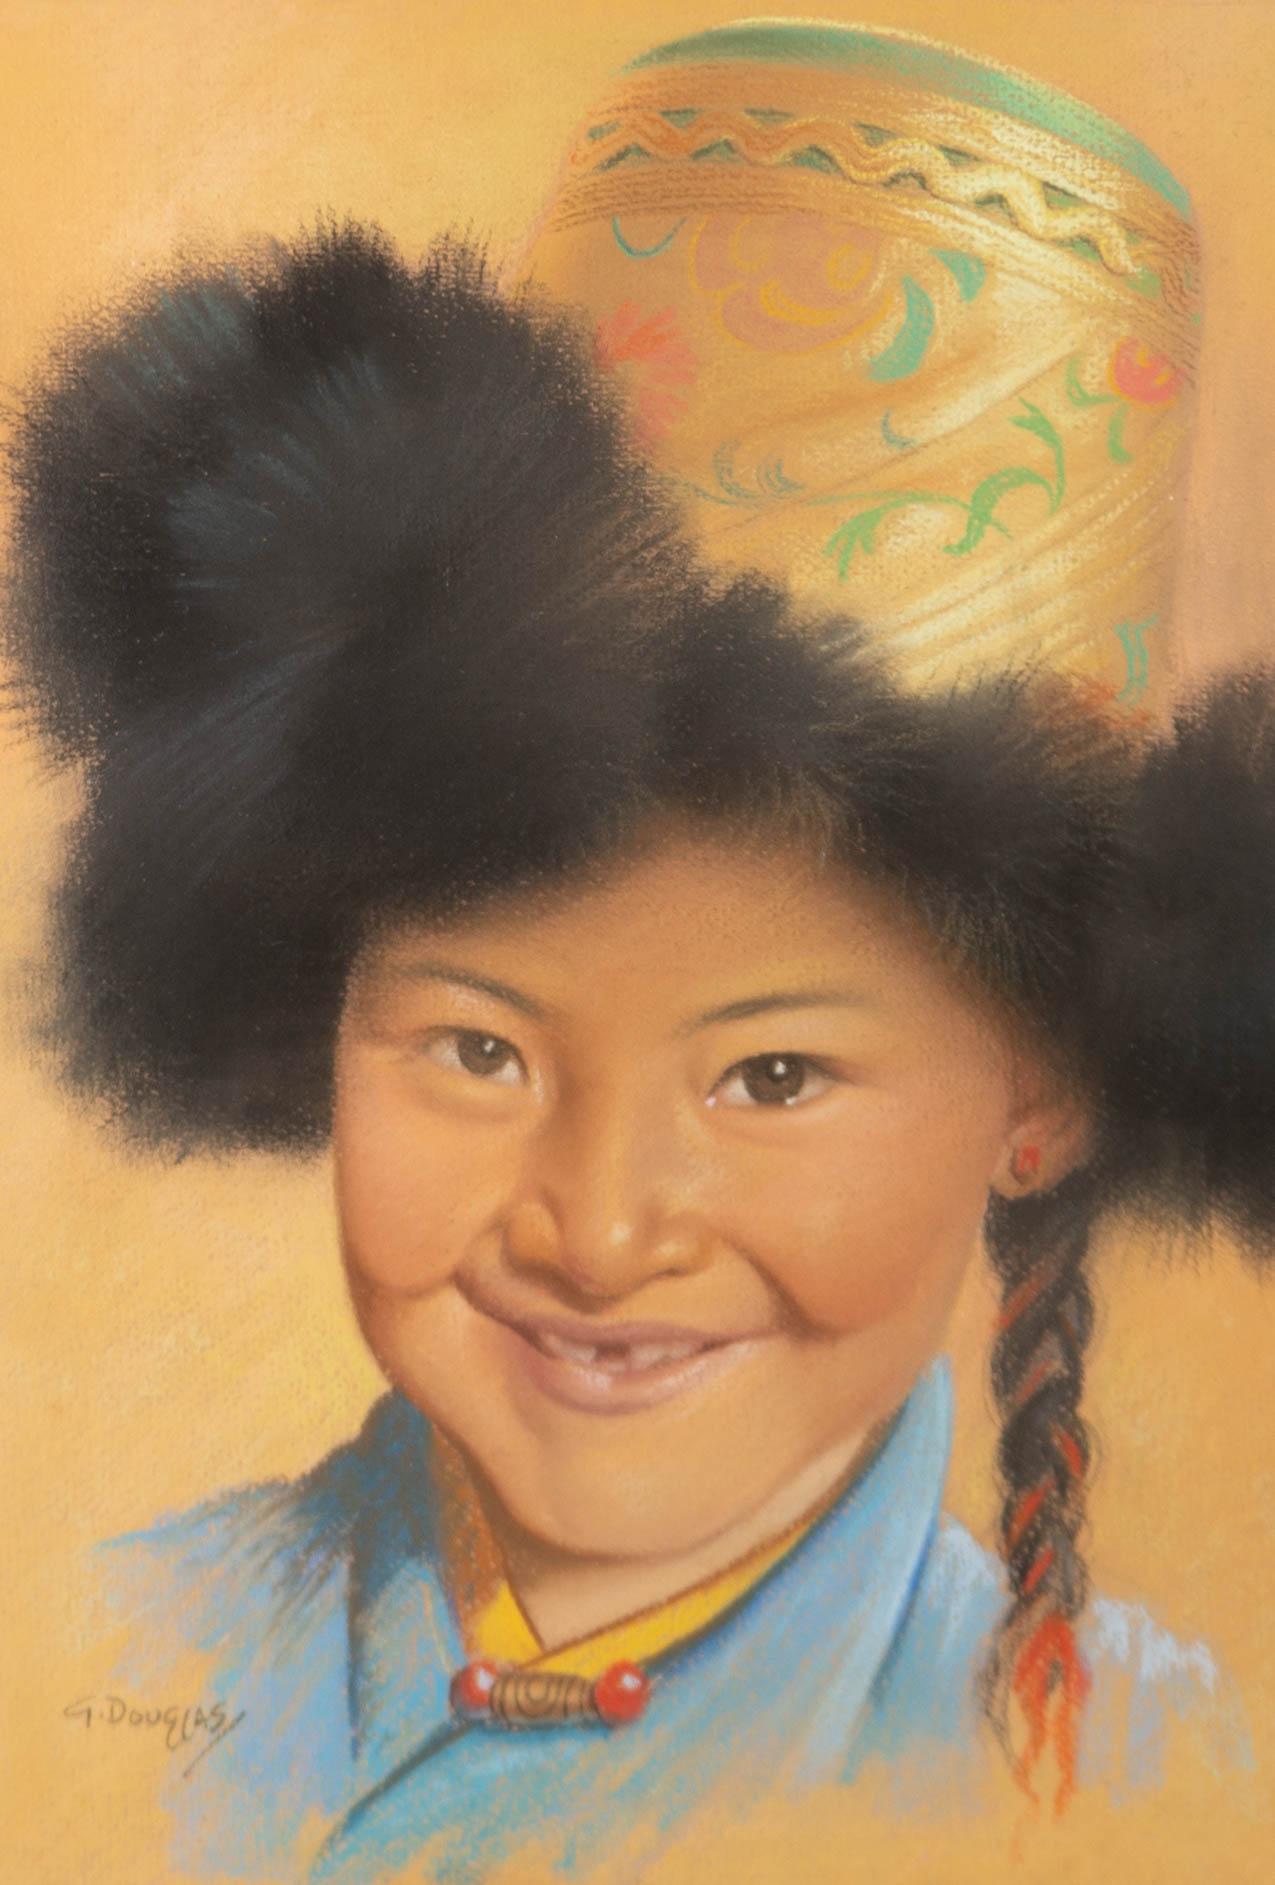 A vibrant and cheery portrait of a young girl in traditional Tibetan dress with a big smile and plaited hair. The artist shows a skilled hand with the medium and has captured a huge amount of character and fun in this portrait.

The artist has